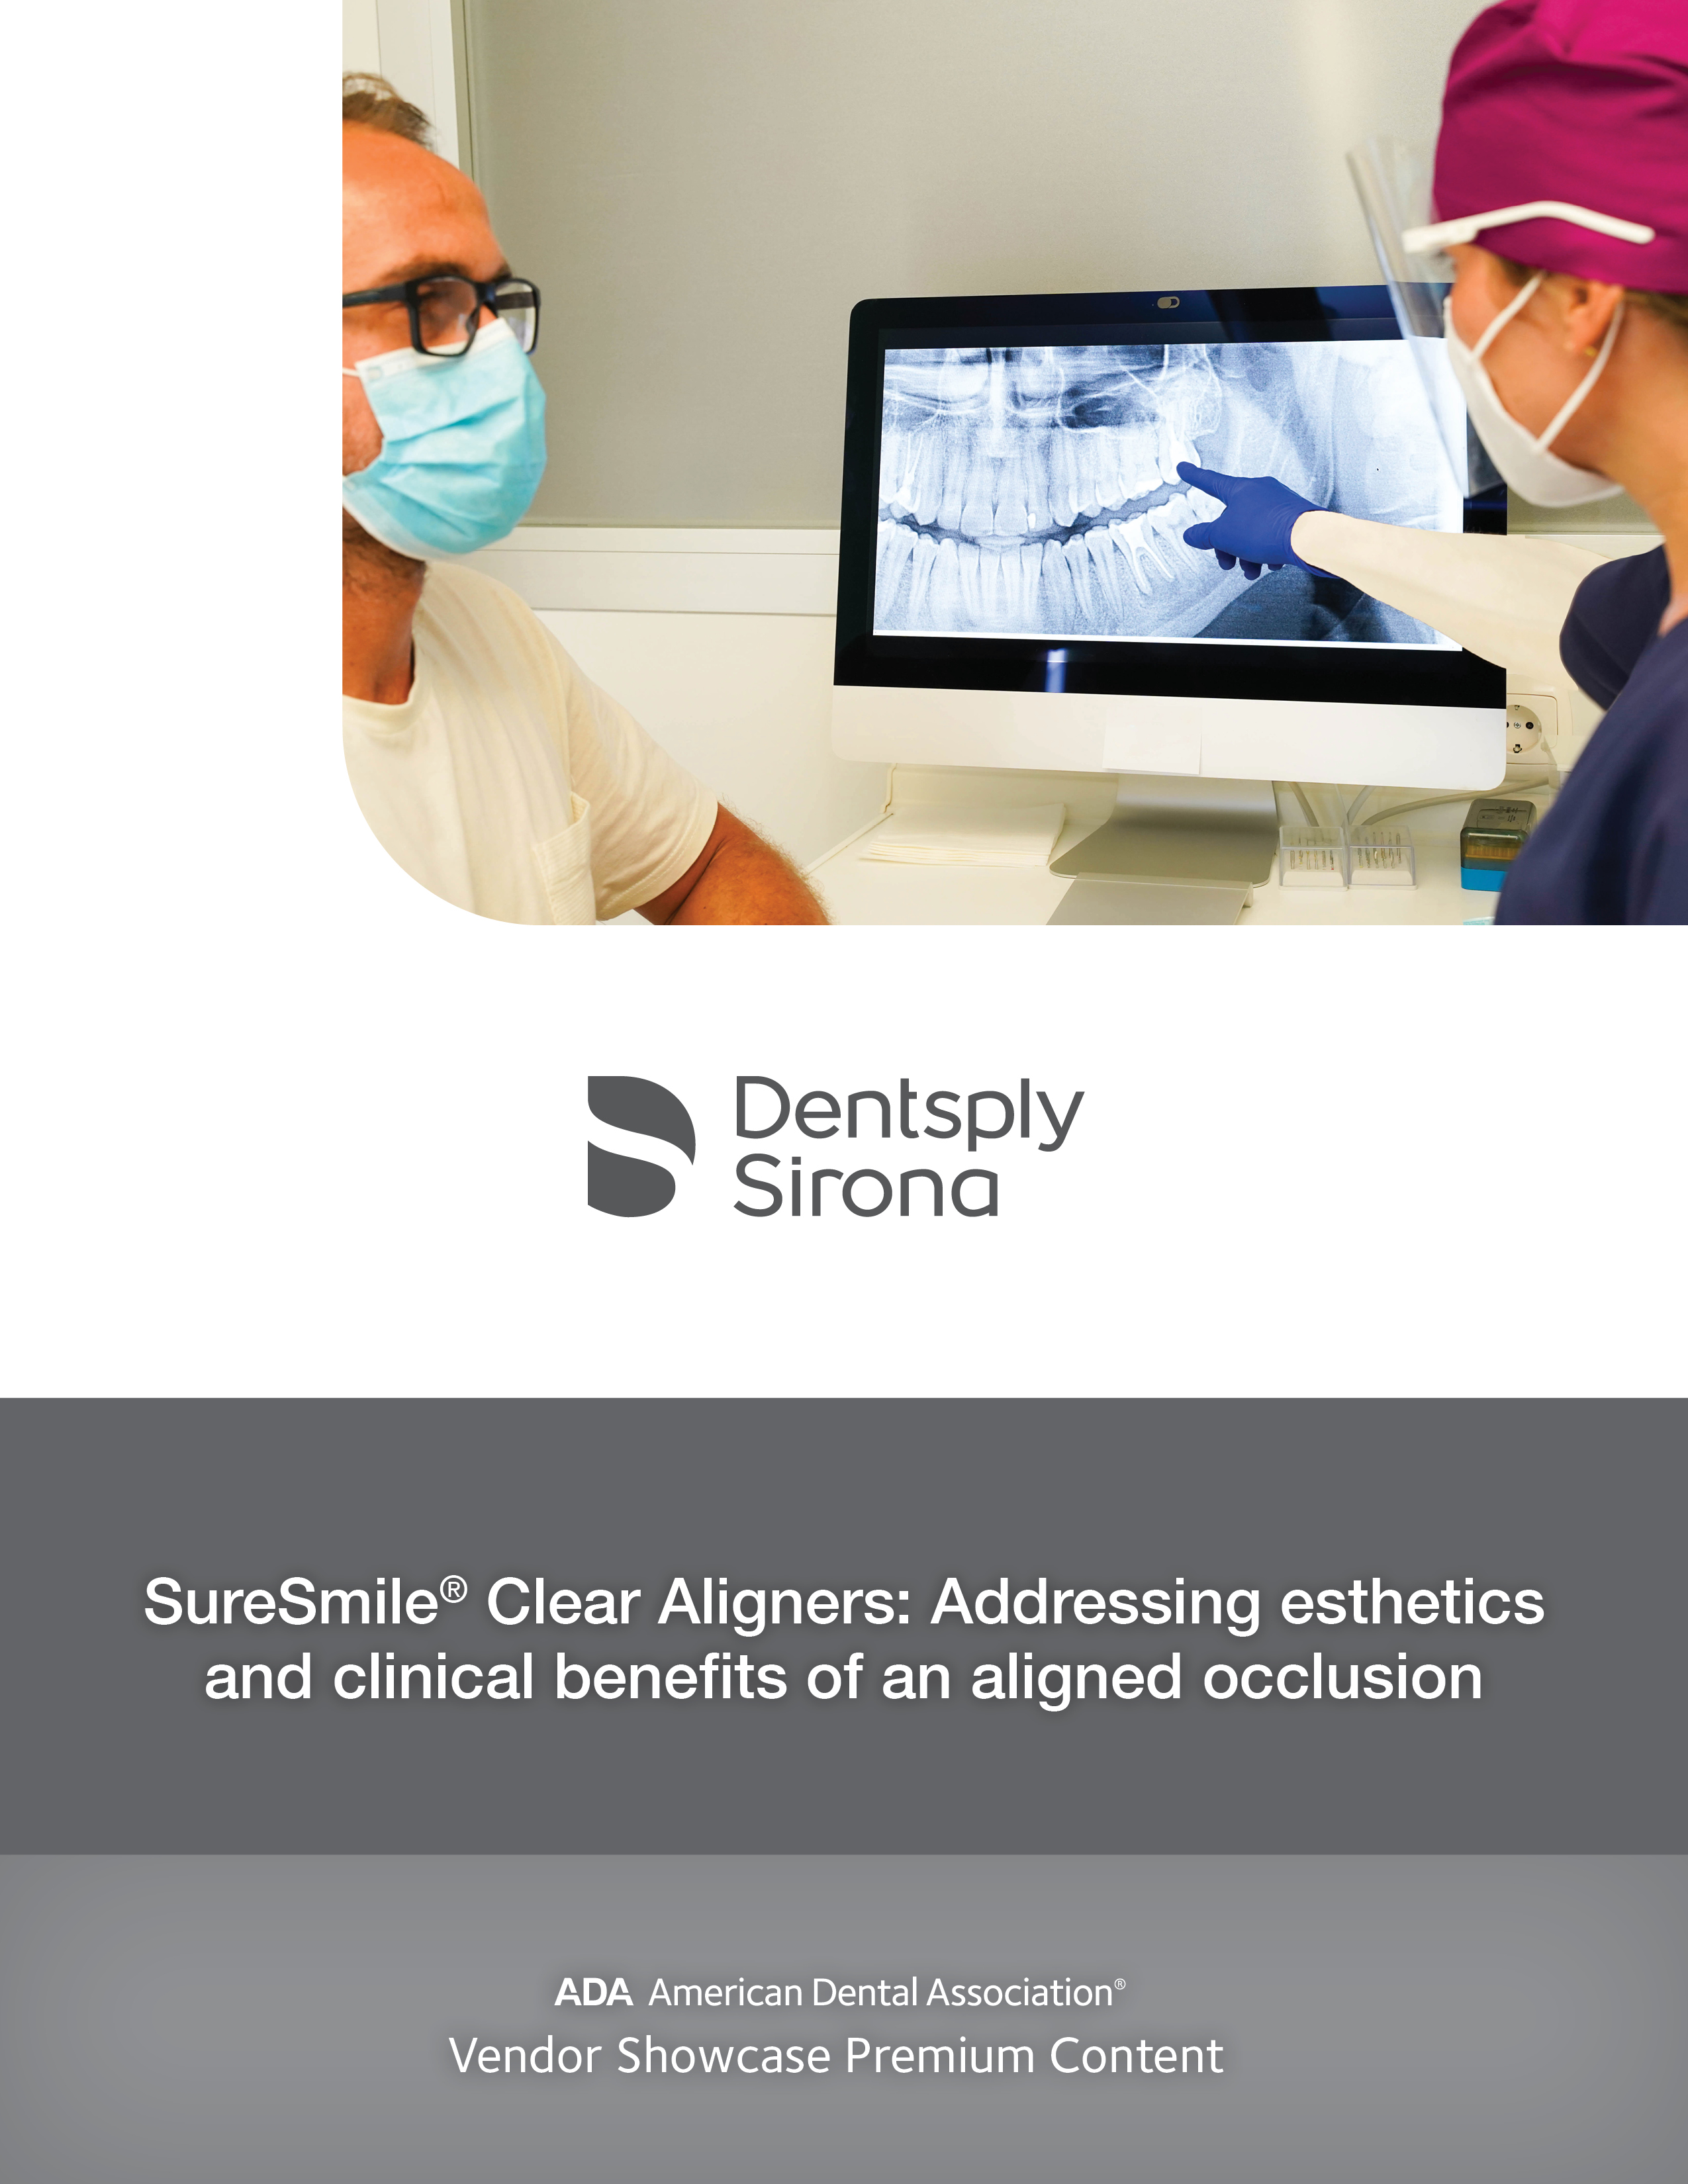 SureSmile® Clear Aligners: Addressing esthetics and clinical benefits of an aligned occlusion